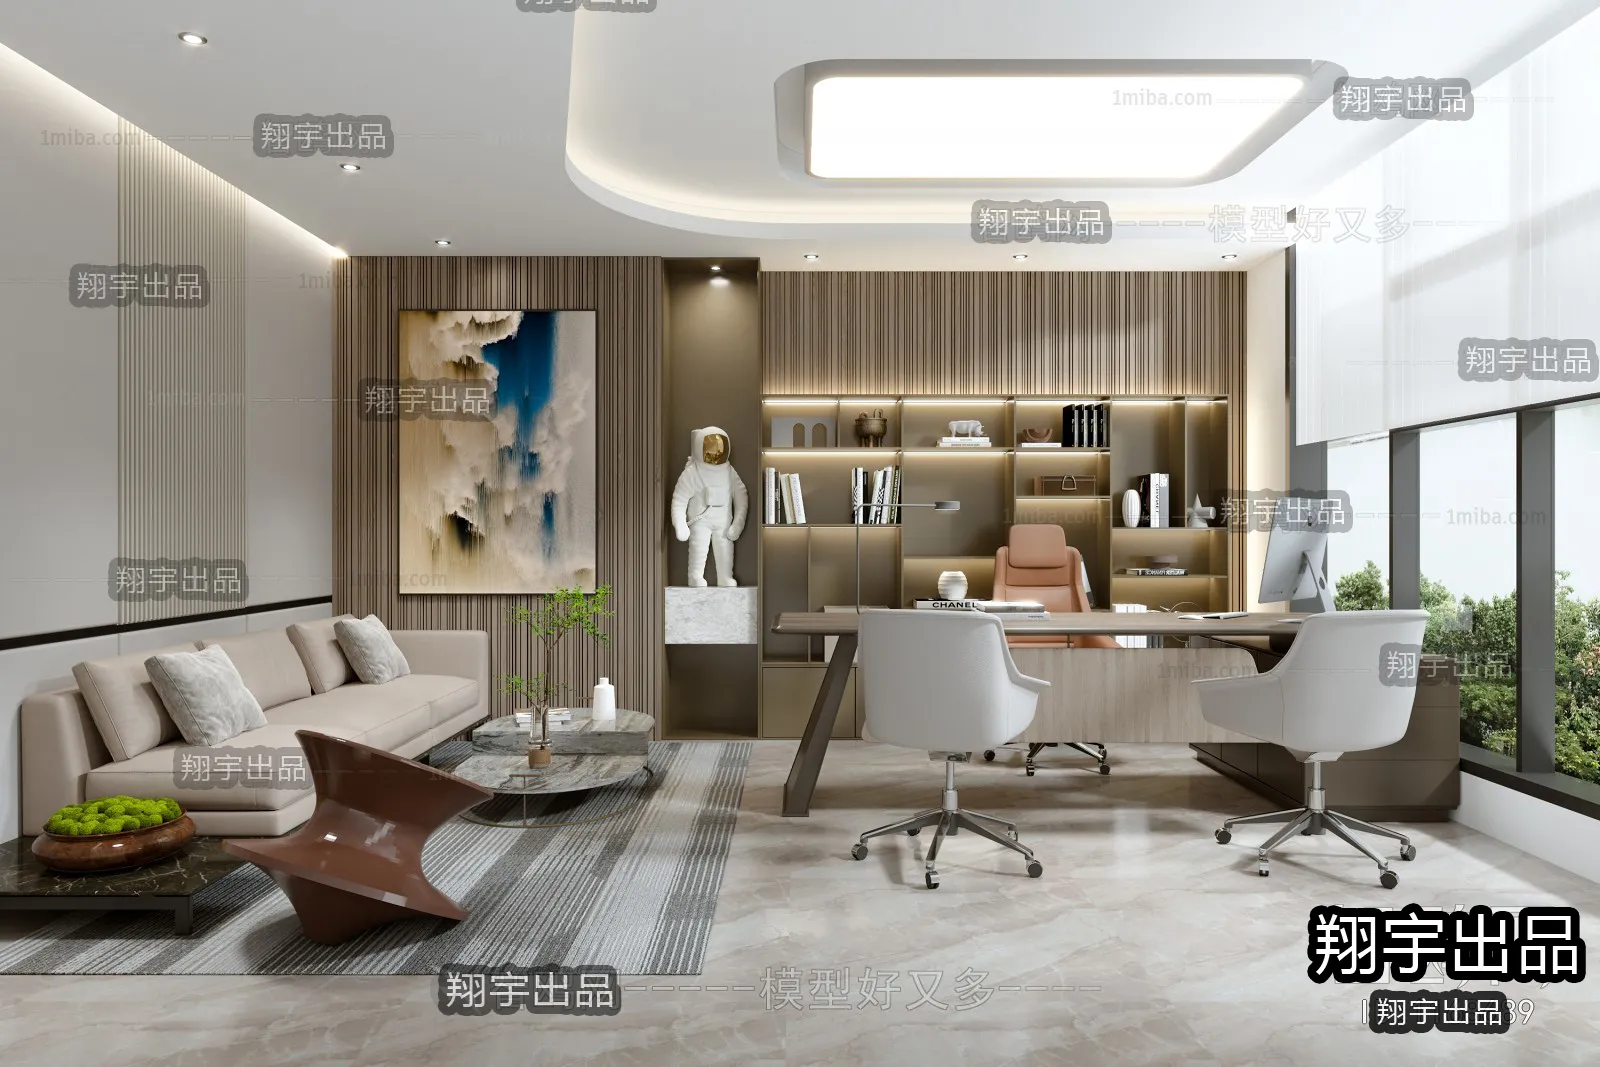 3D OFFICE INTERIOR (VRAY) – MANAGER ROOM 3D SCENES – 112